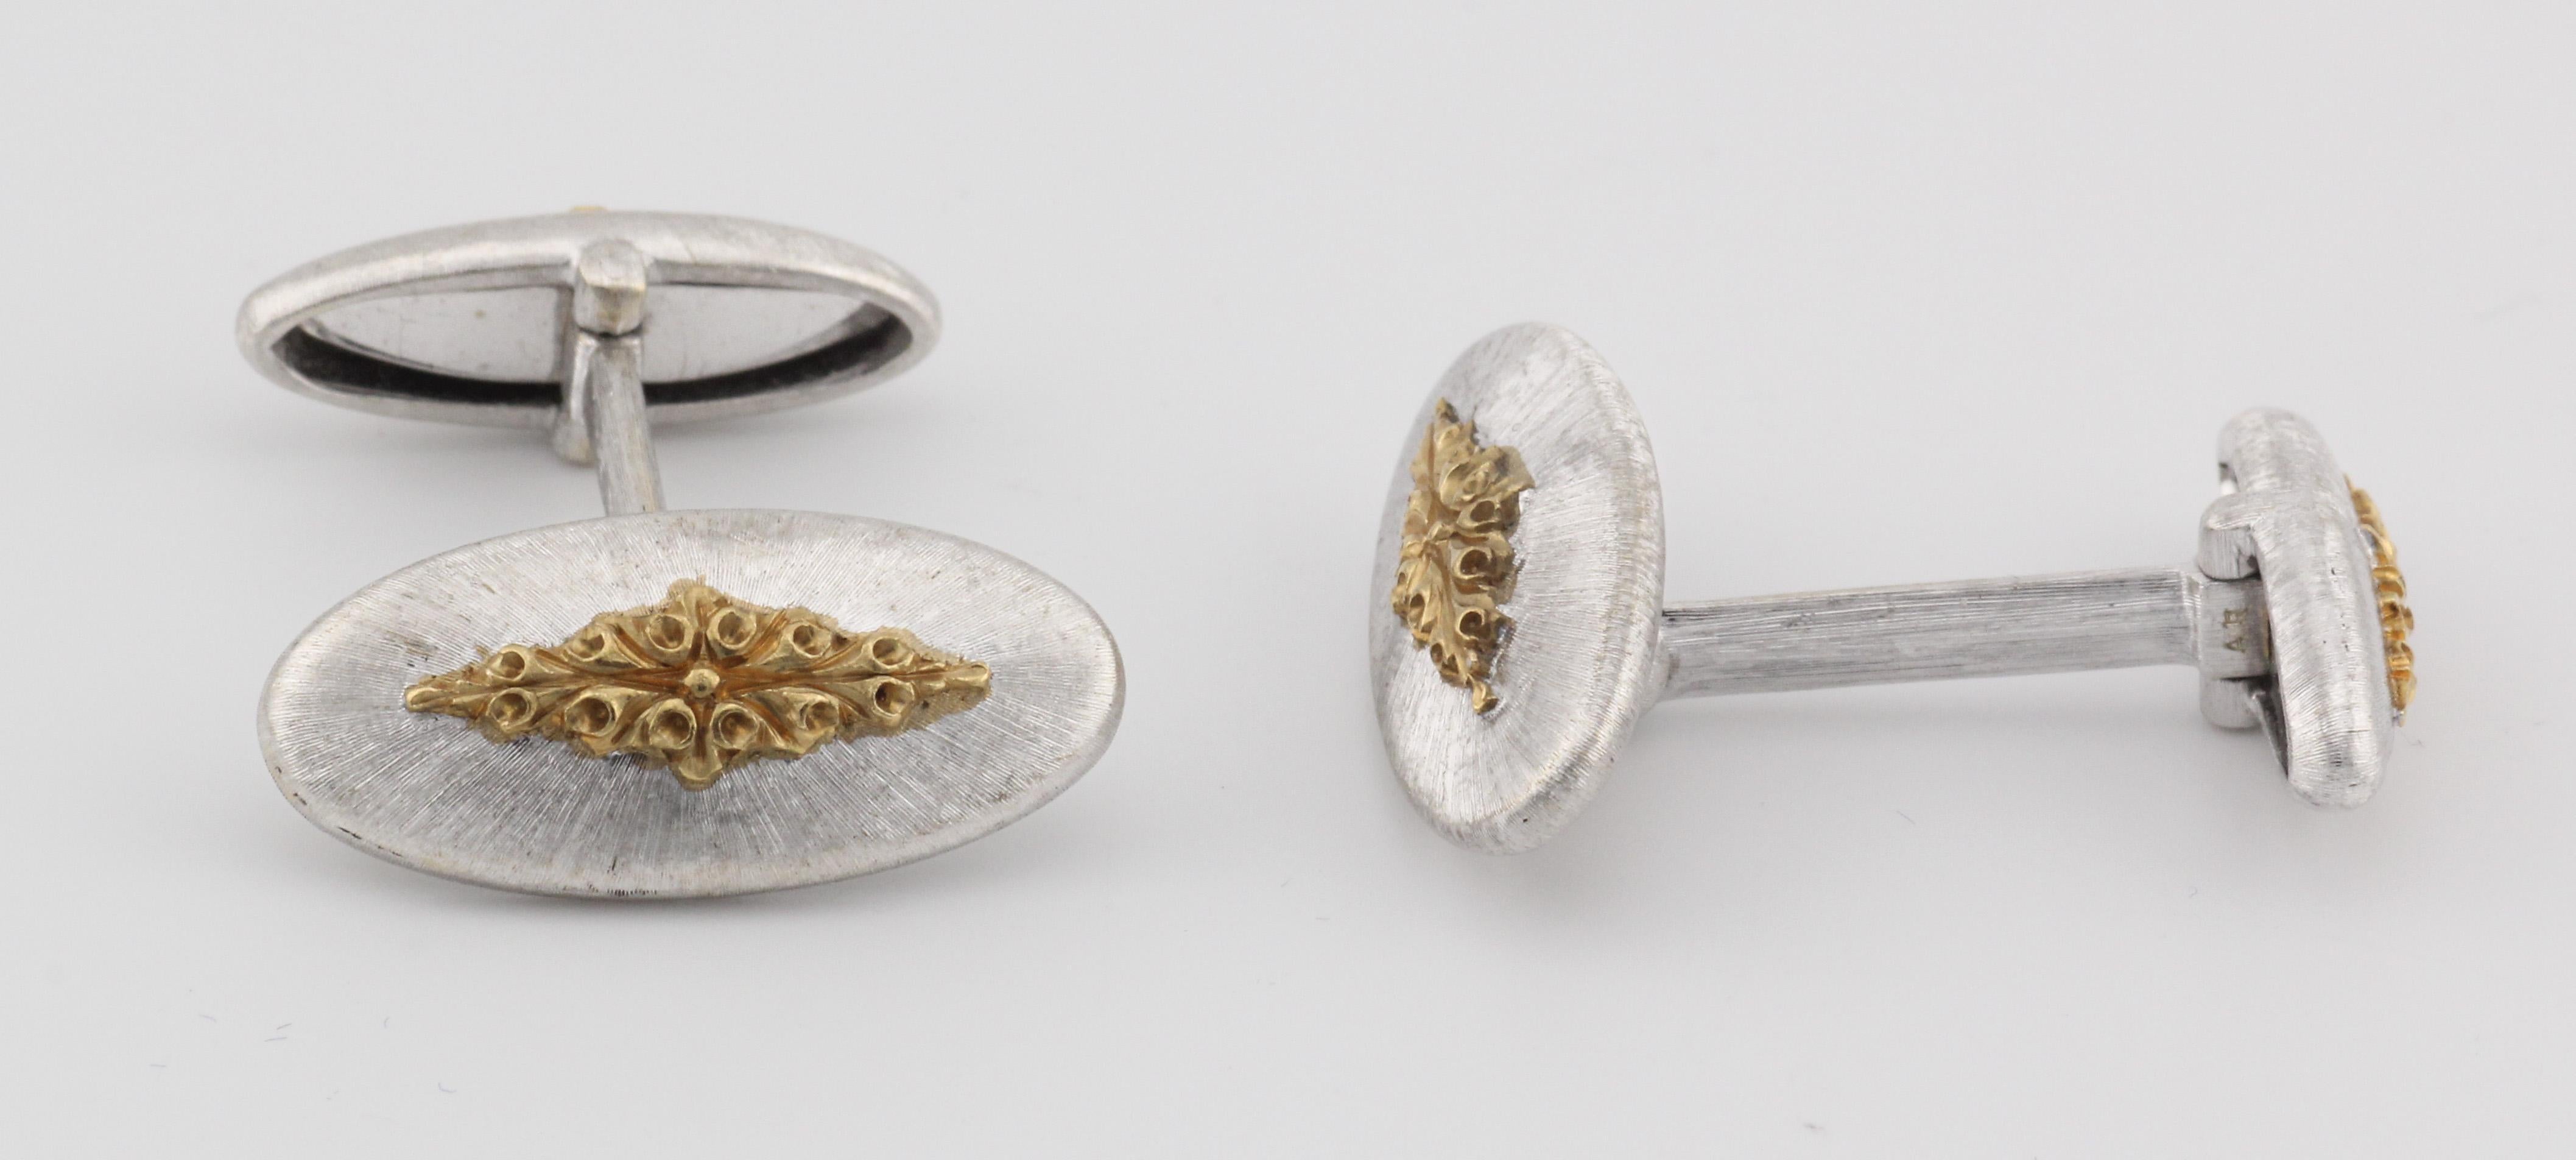 Buccellati 18K White Yellow Gold Cufflinks 3 Studs Set In Good Condition For Sale In Bellmore, NY